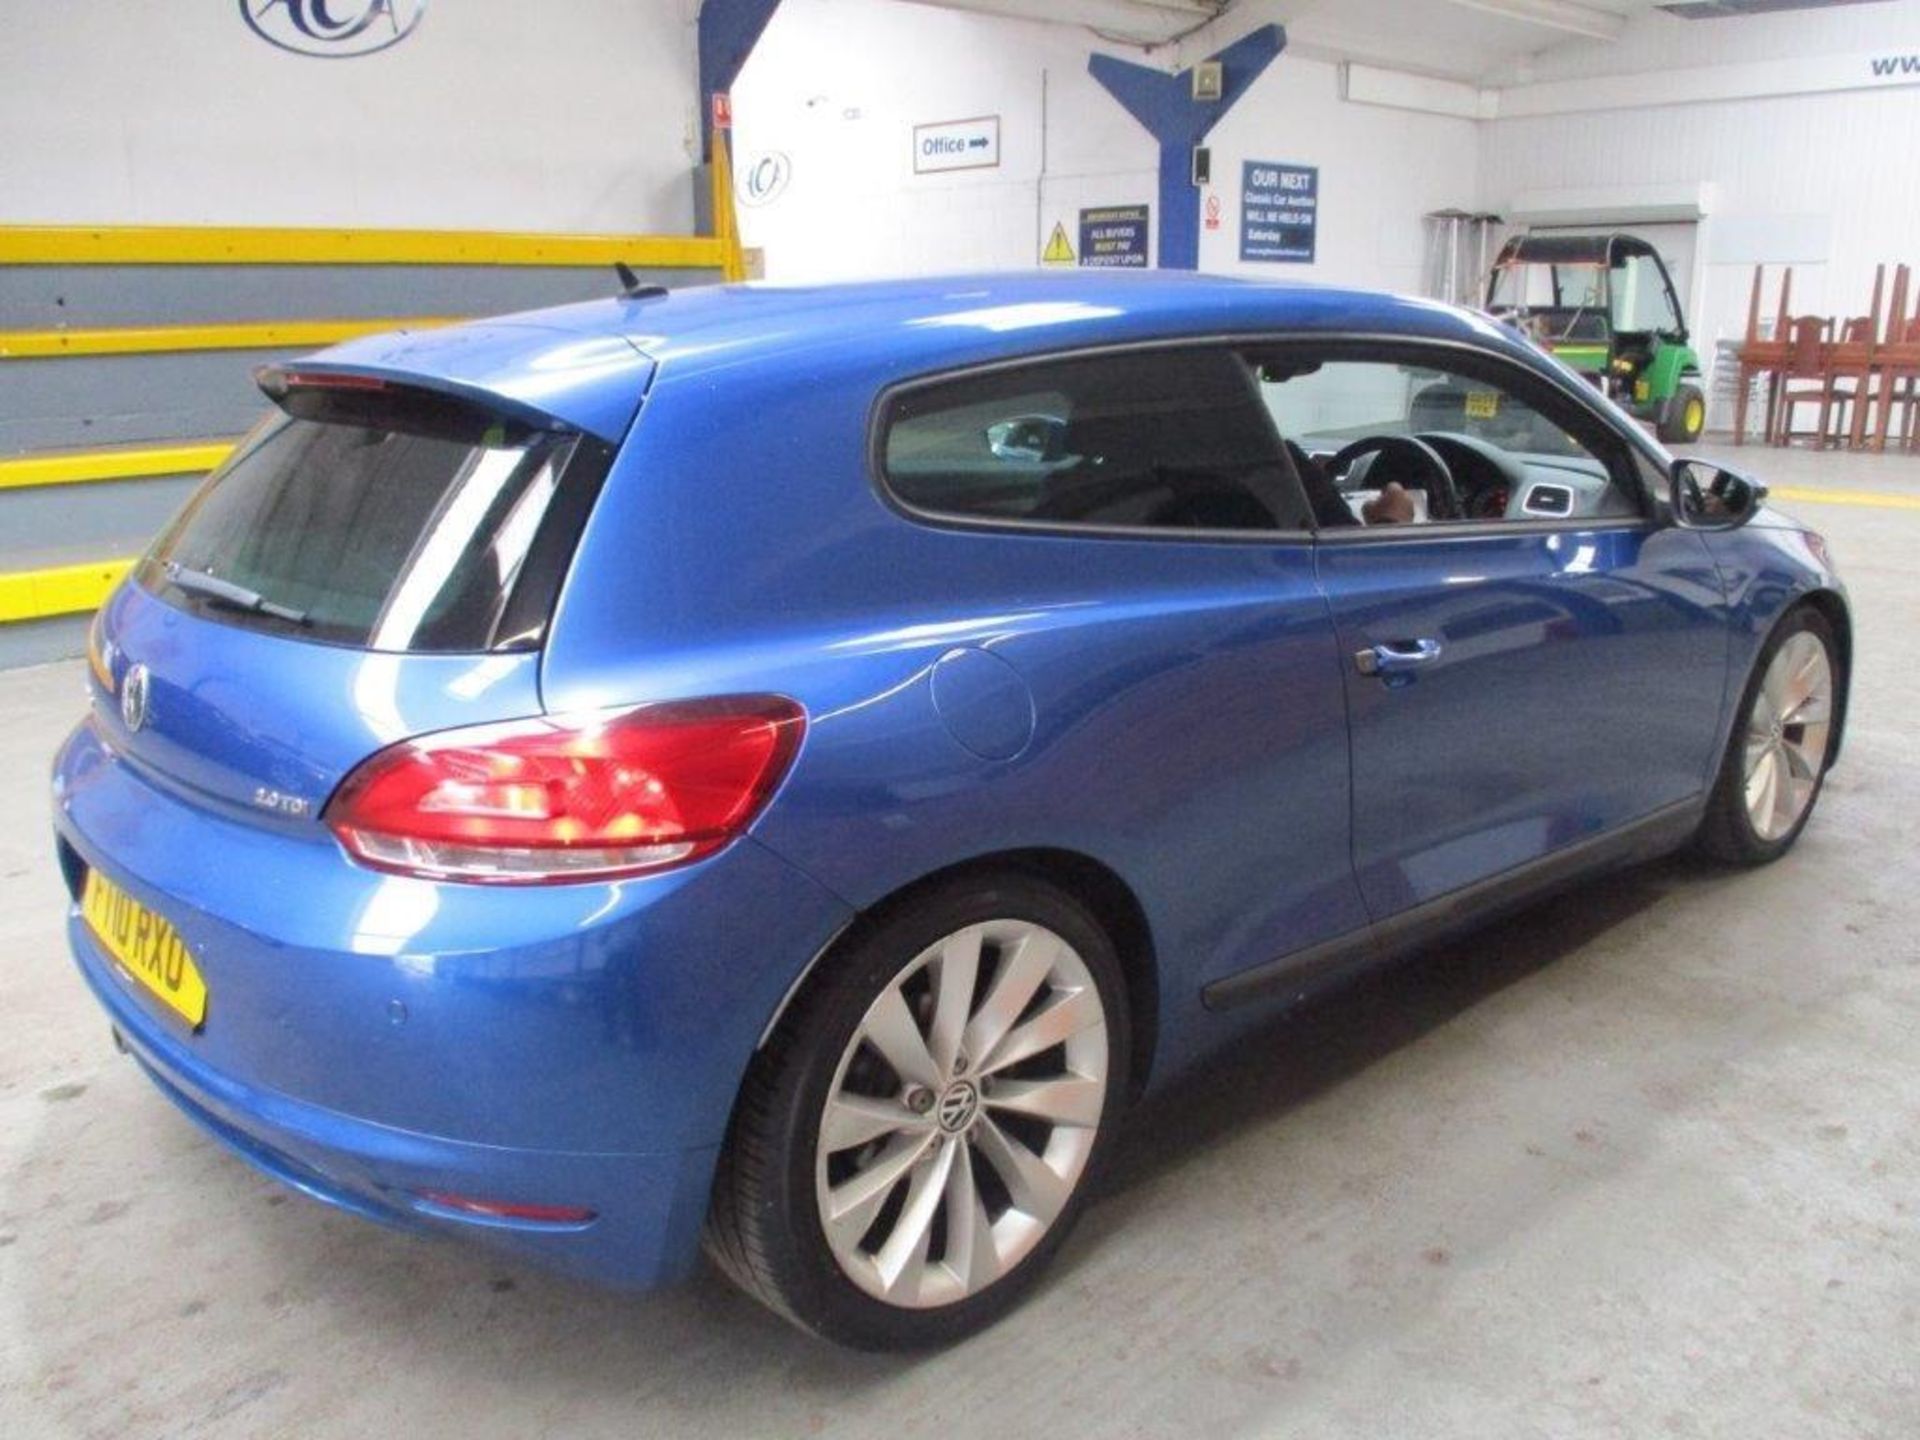 10 10 VW Scirocco GT TDI 170 - Image 4 of 24